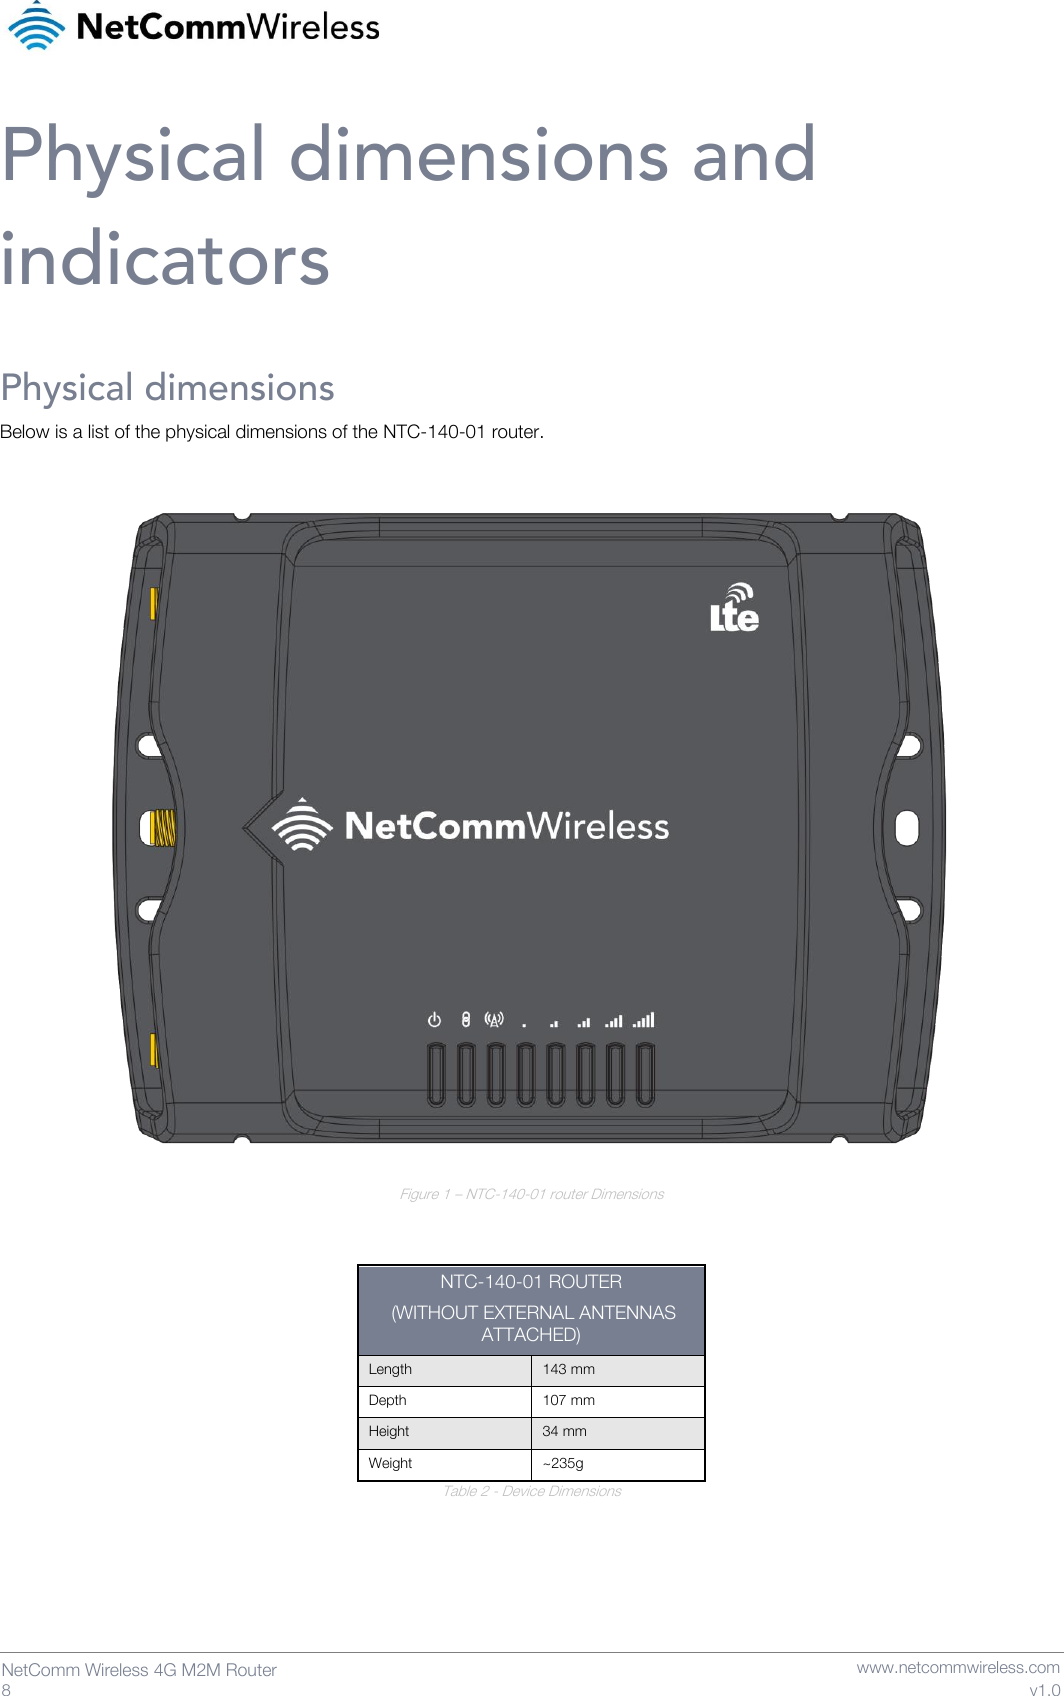   8  NetComm Wireless 4G M2M Router   www.netcommwireless.com v1.0 Physical dimensions and indicators Physical dimensions Below is a list of the physical dimensions of the NTC-140-01 router.   Figure 1 – NTC-140-01 router Dimensions   NTC-140-01 ROUTER  (WITHOUT EXTERNAL ANTENNAS ATTACHED) Length 143 mm Depth 107 mm Height 34 mm Weight ~235g Table 2 - Device Dimensions   